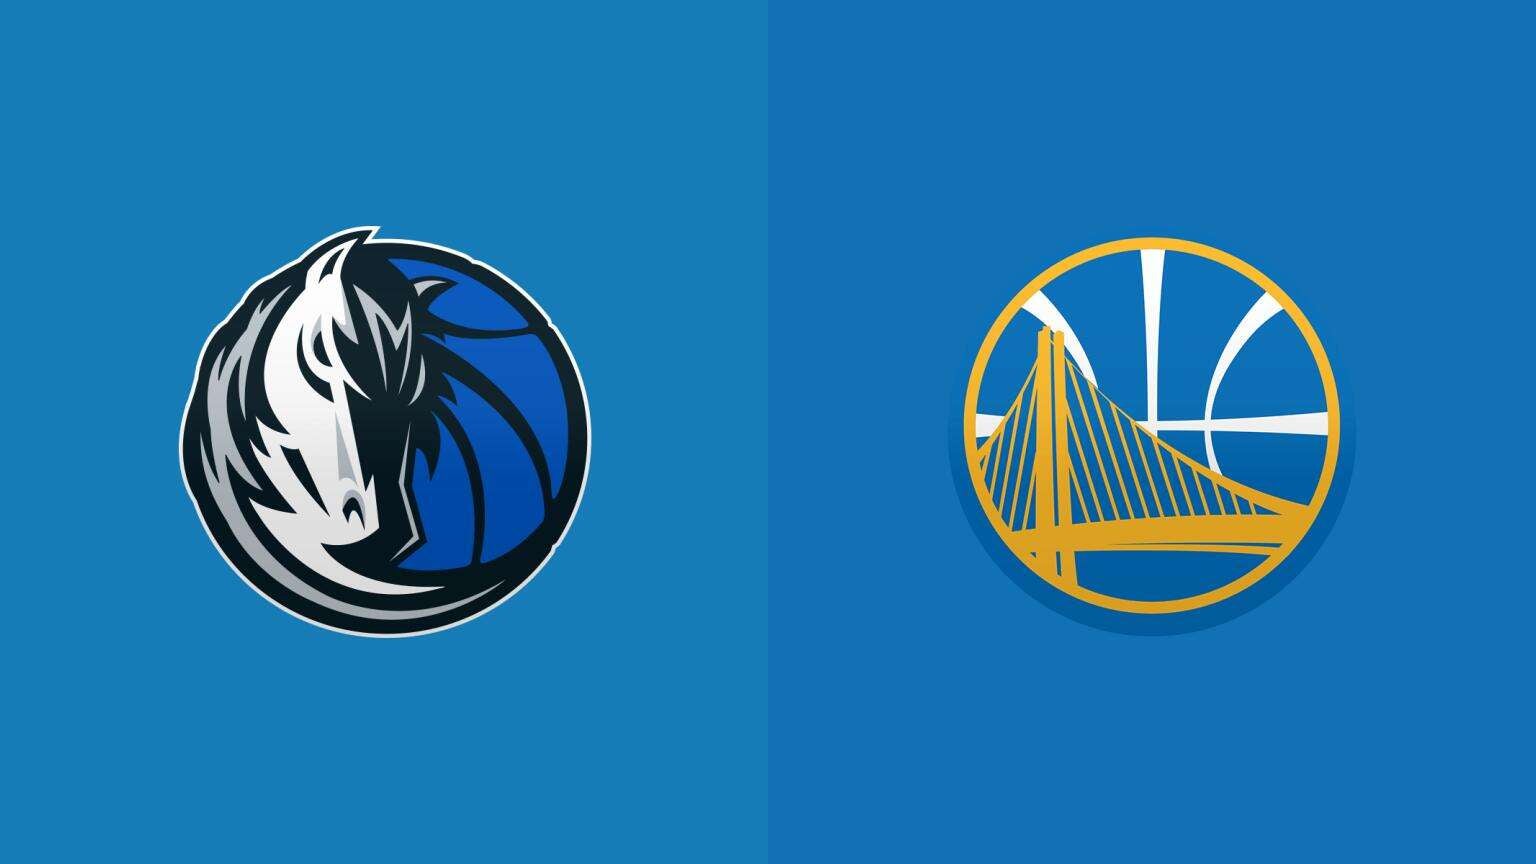 How To Watch 2022 Nba Western Conference Finals Dallas Mavericks Vs Golden State Warriors